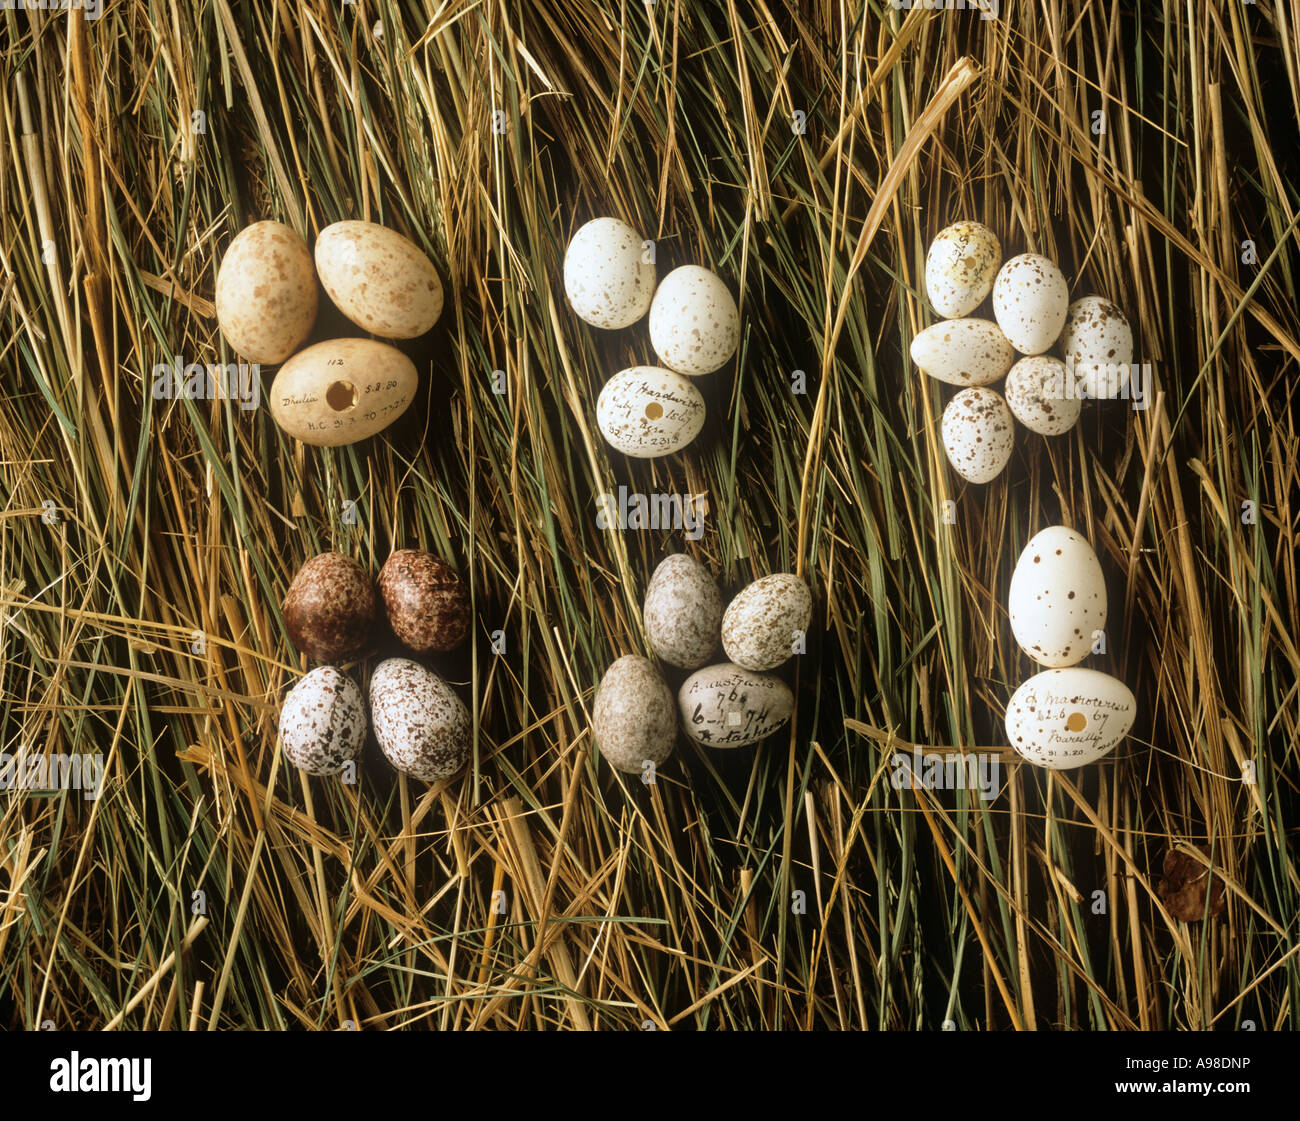 A collection of eggs from western Asia Stock Photo